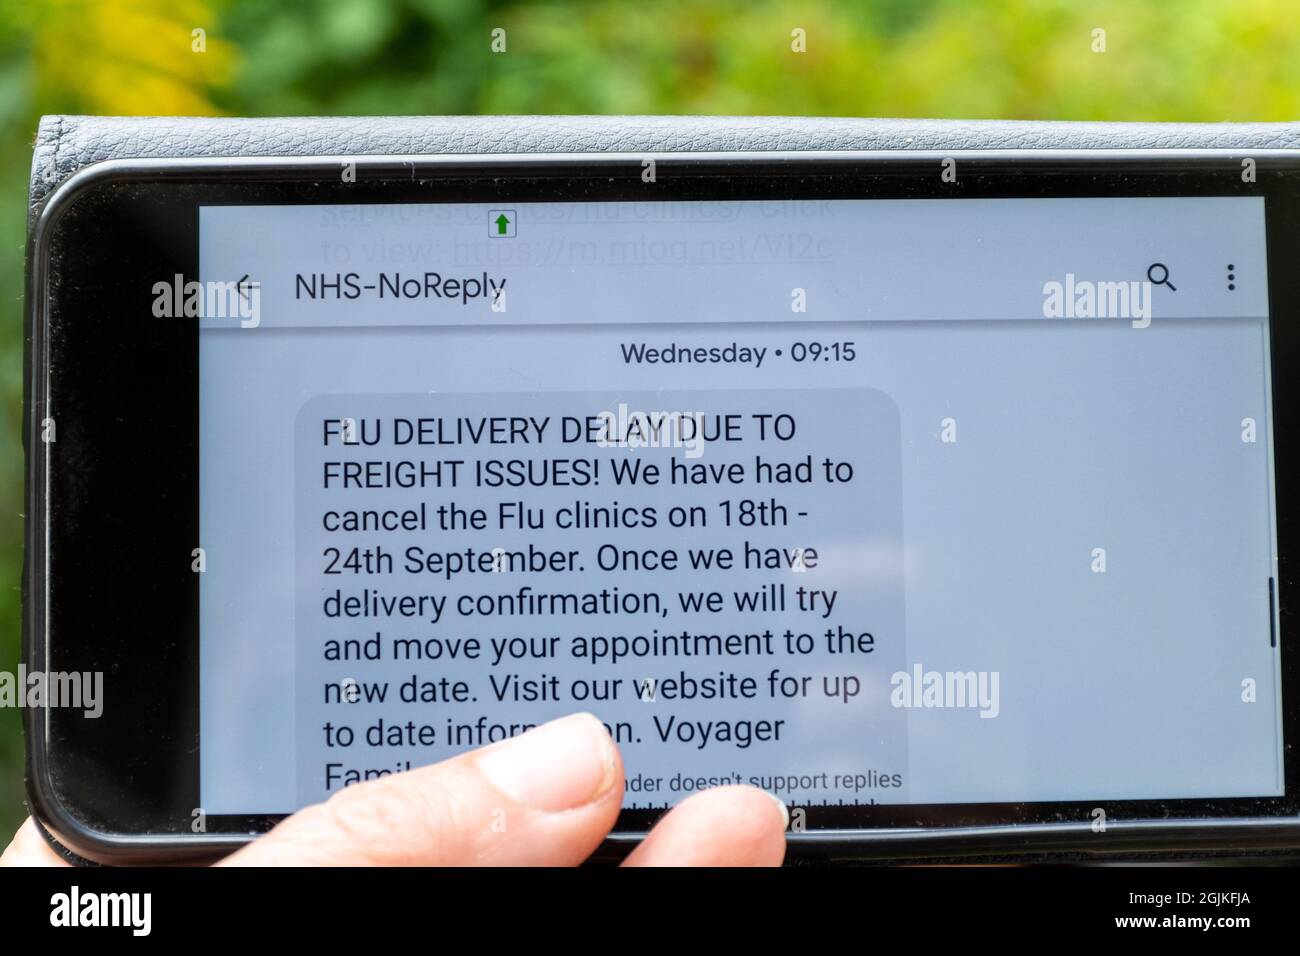 Flu jab clinic cancellation text message on mobile phone, UK, September 2021. Cancelled vaccinations due to freight delivery delays. Stock Photo